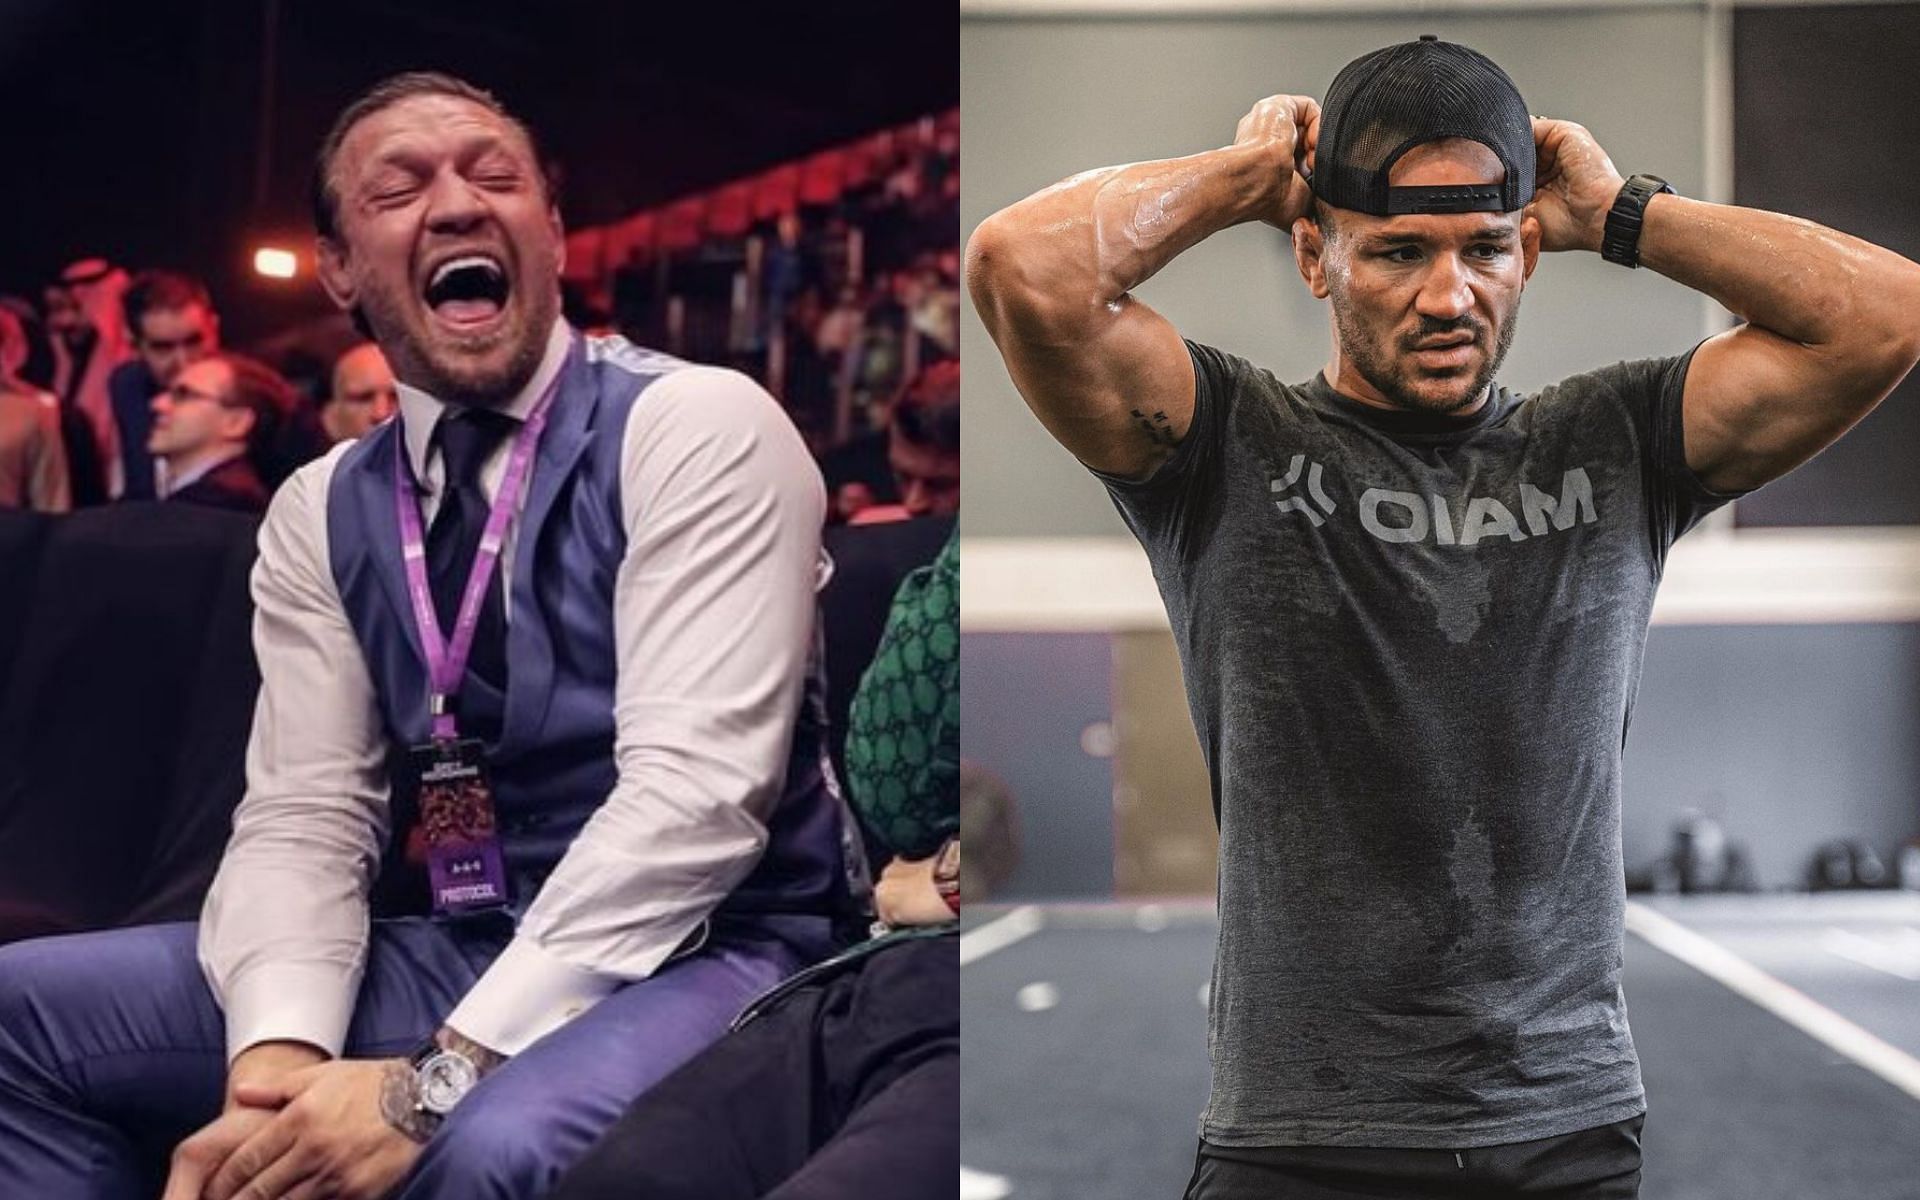 Conor McGregor (left) hints that he might not fight Michael Chandler (right) [Images courtesy @thenotoriousmma and @ikechandlermma on Instagram]